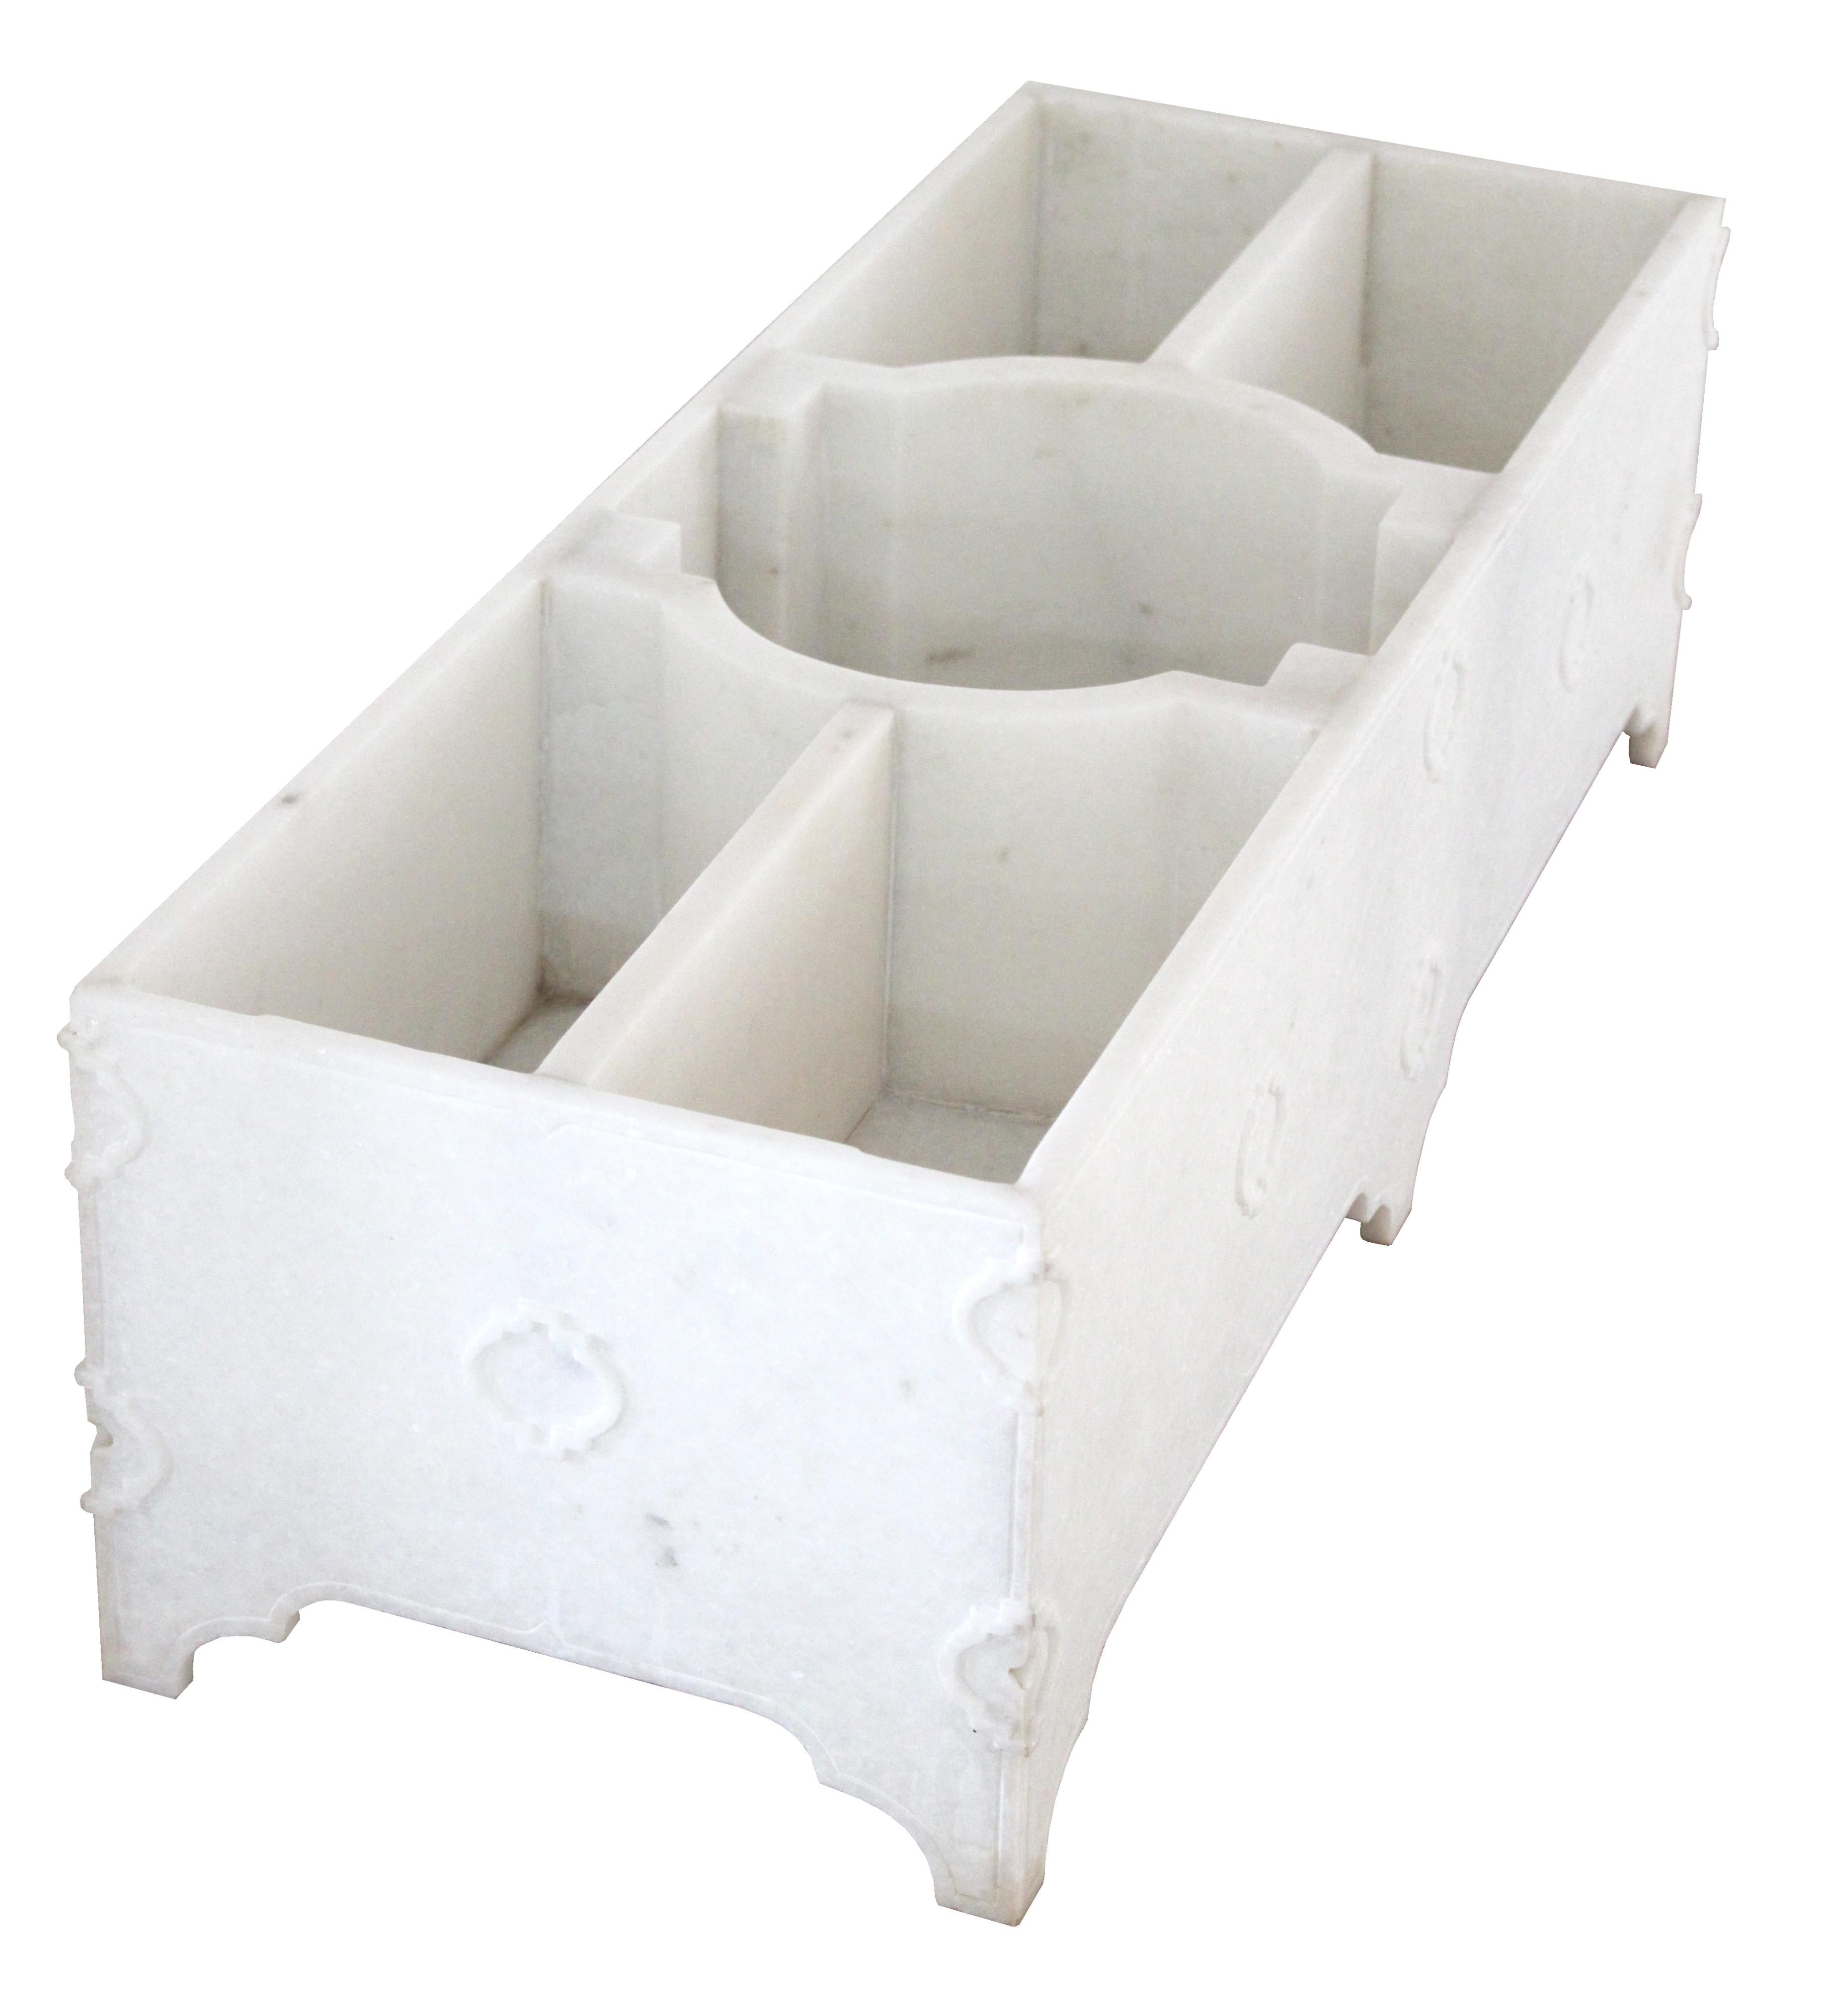 Hand-Crafted Jardin Planter in White Marble by Paul Mathieu for Stephanie Odegard For Sale